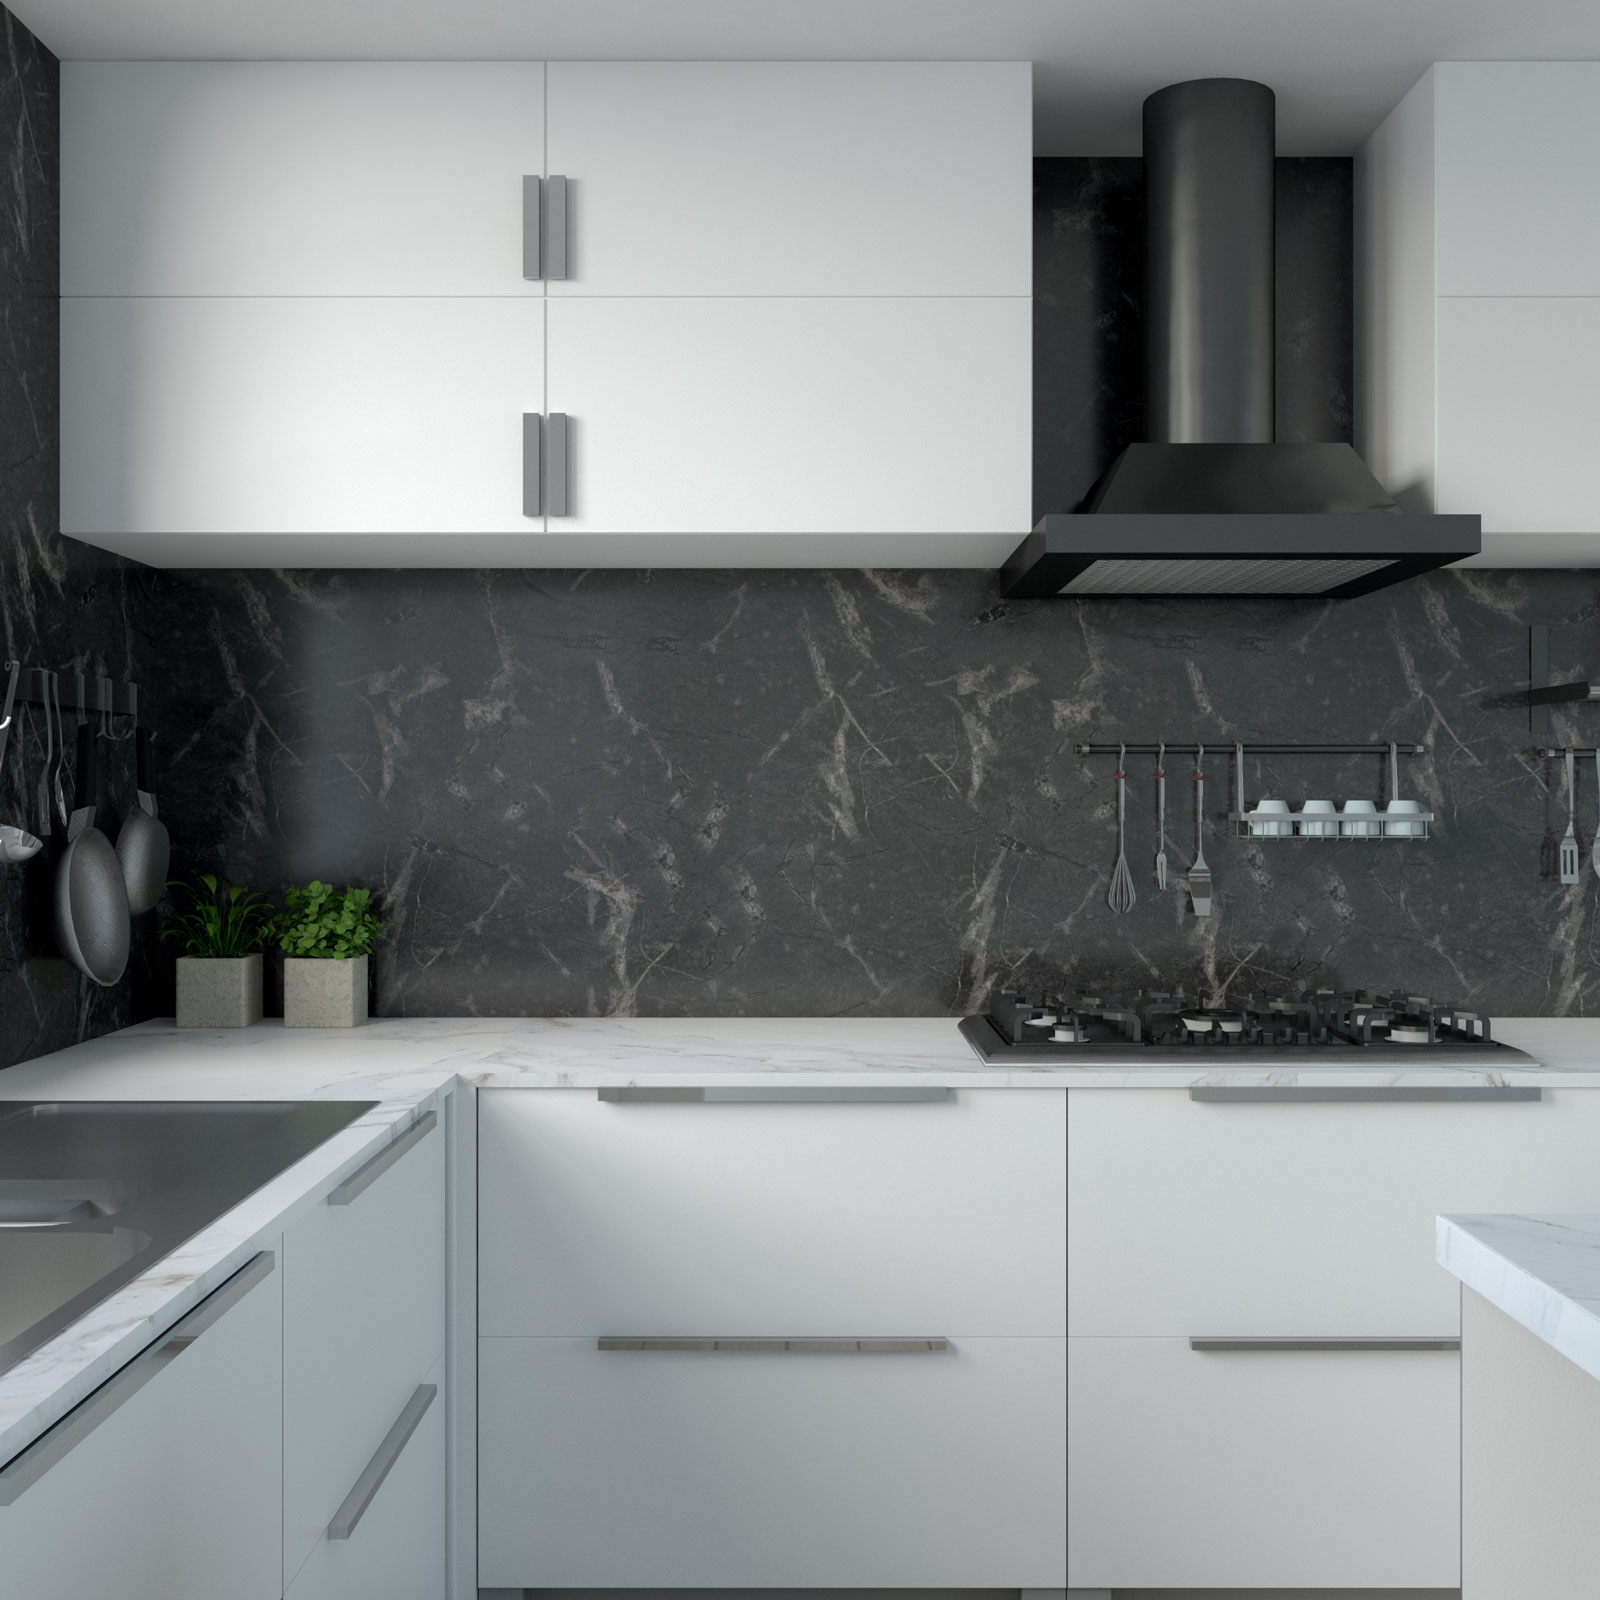 Kitchen ideas with white cabinets and black marble backsplash